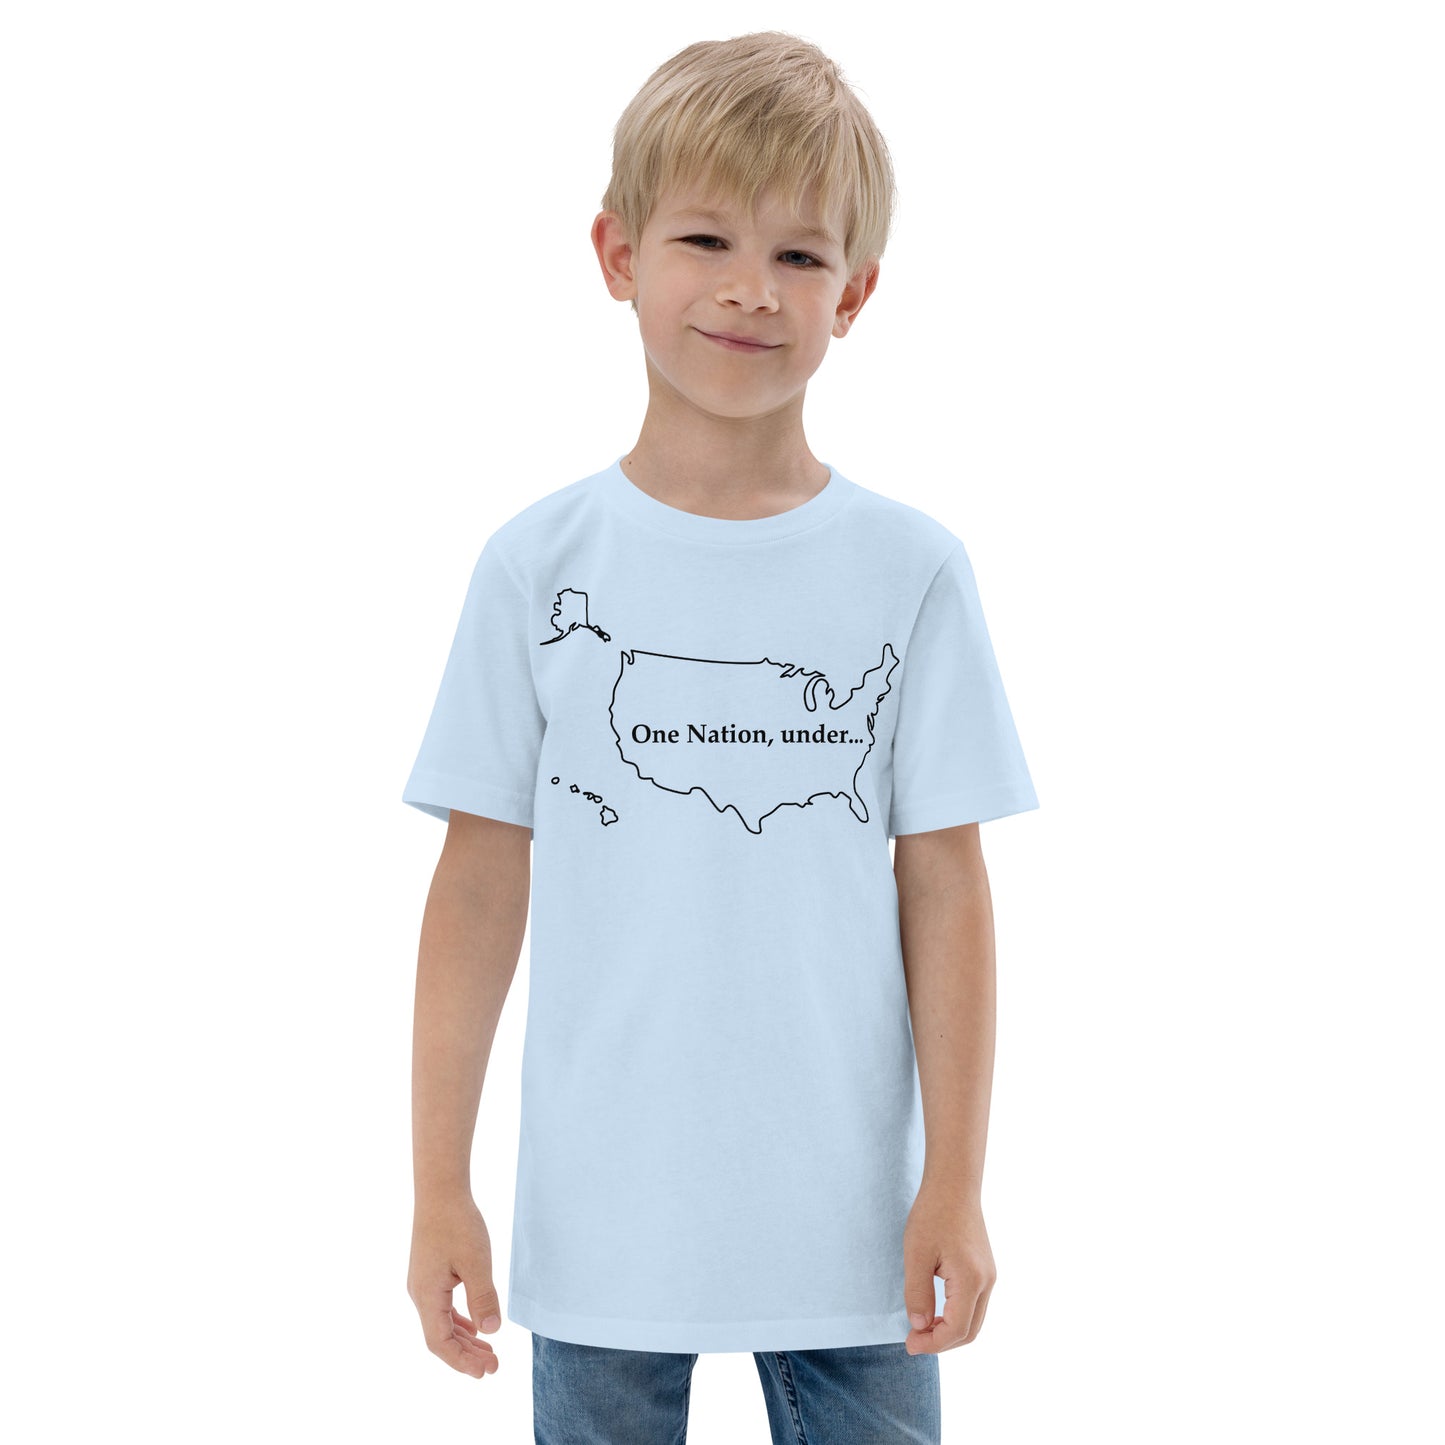 Youth Believe in God and have no religious affiliation t-shirt